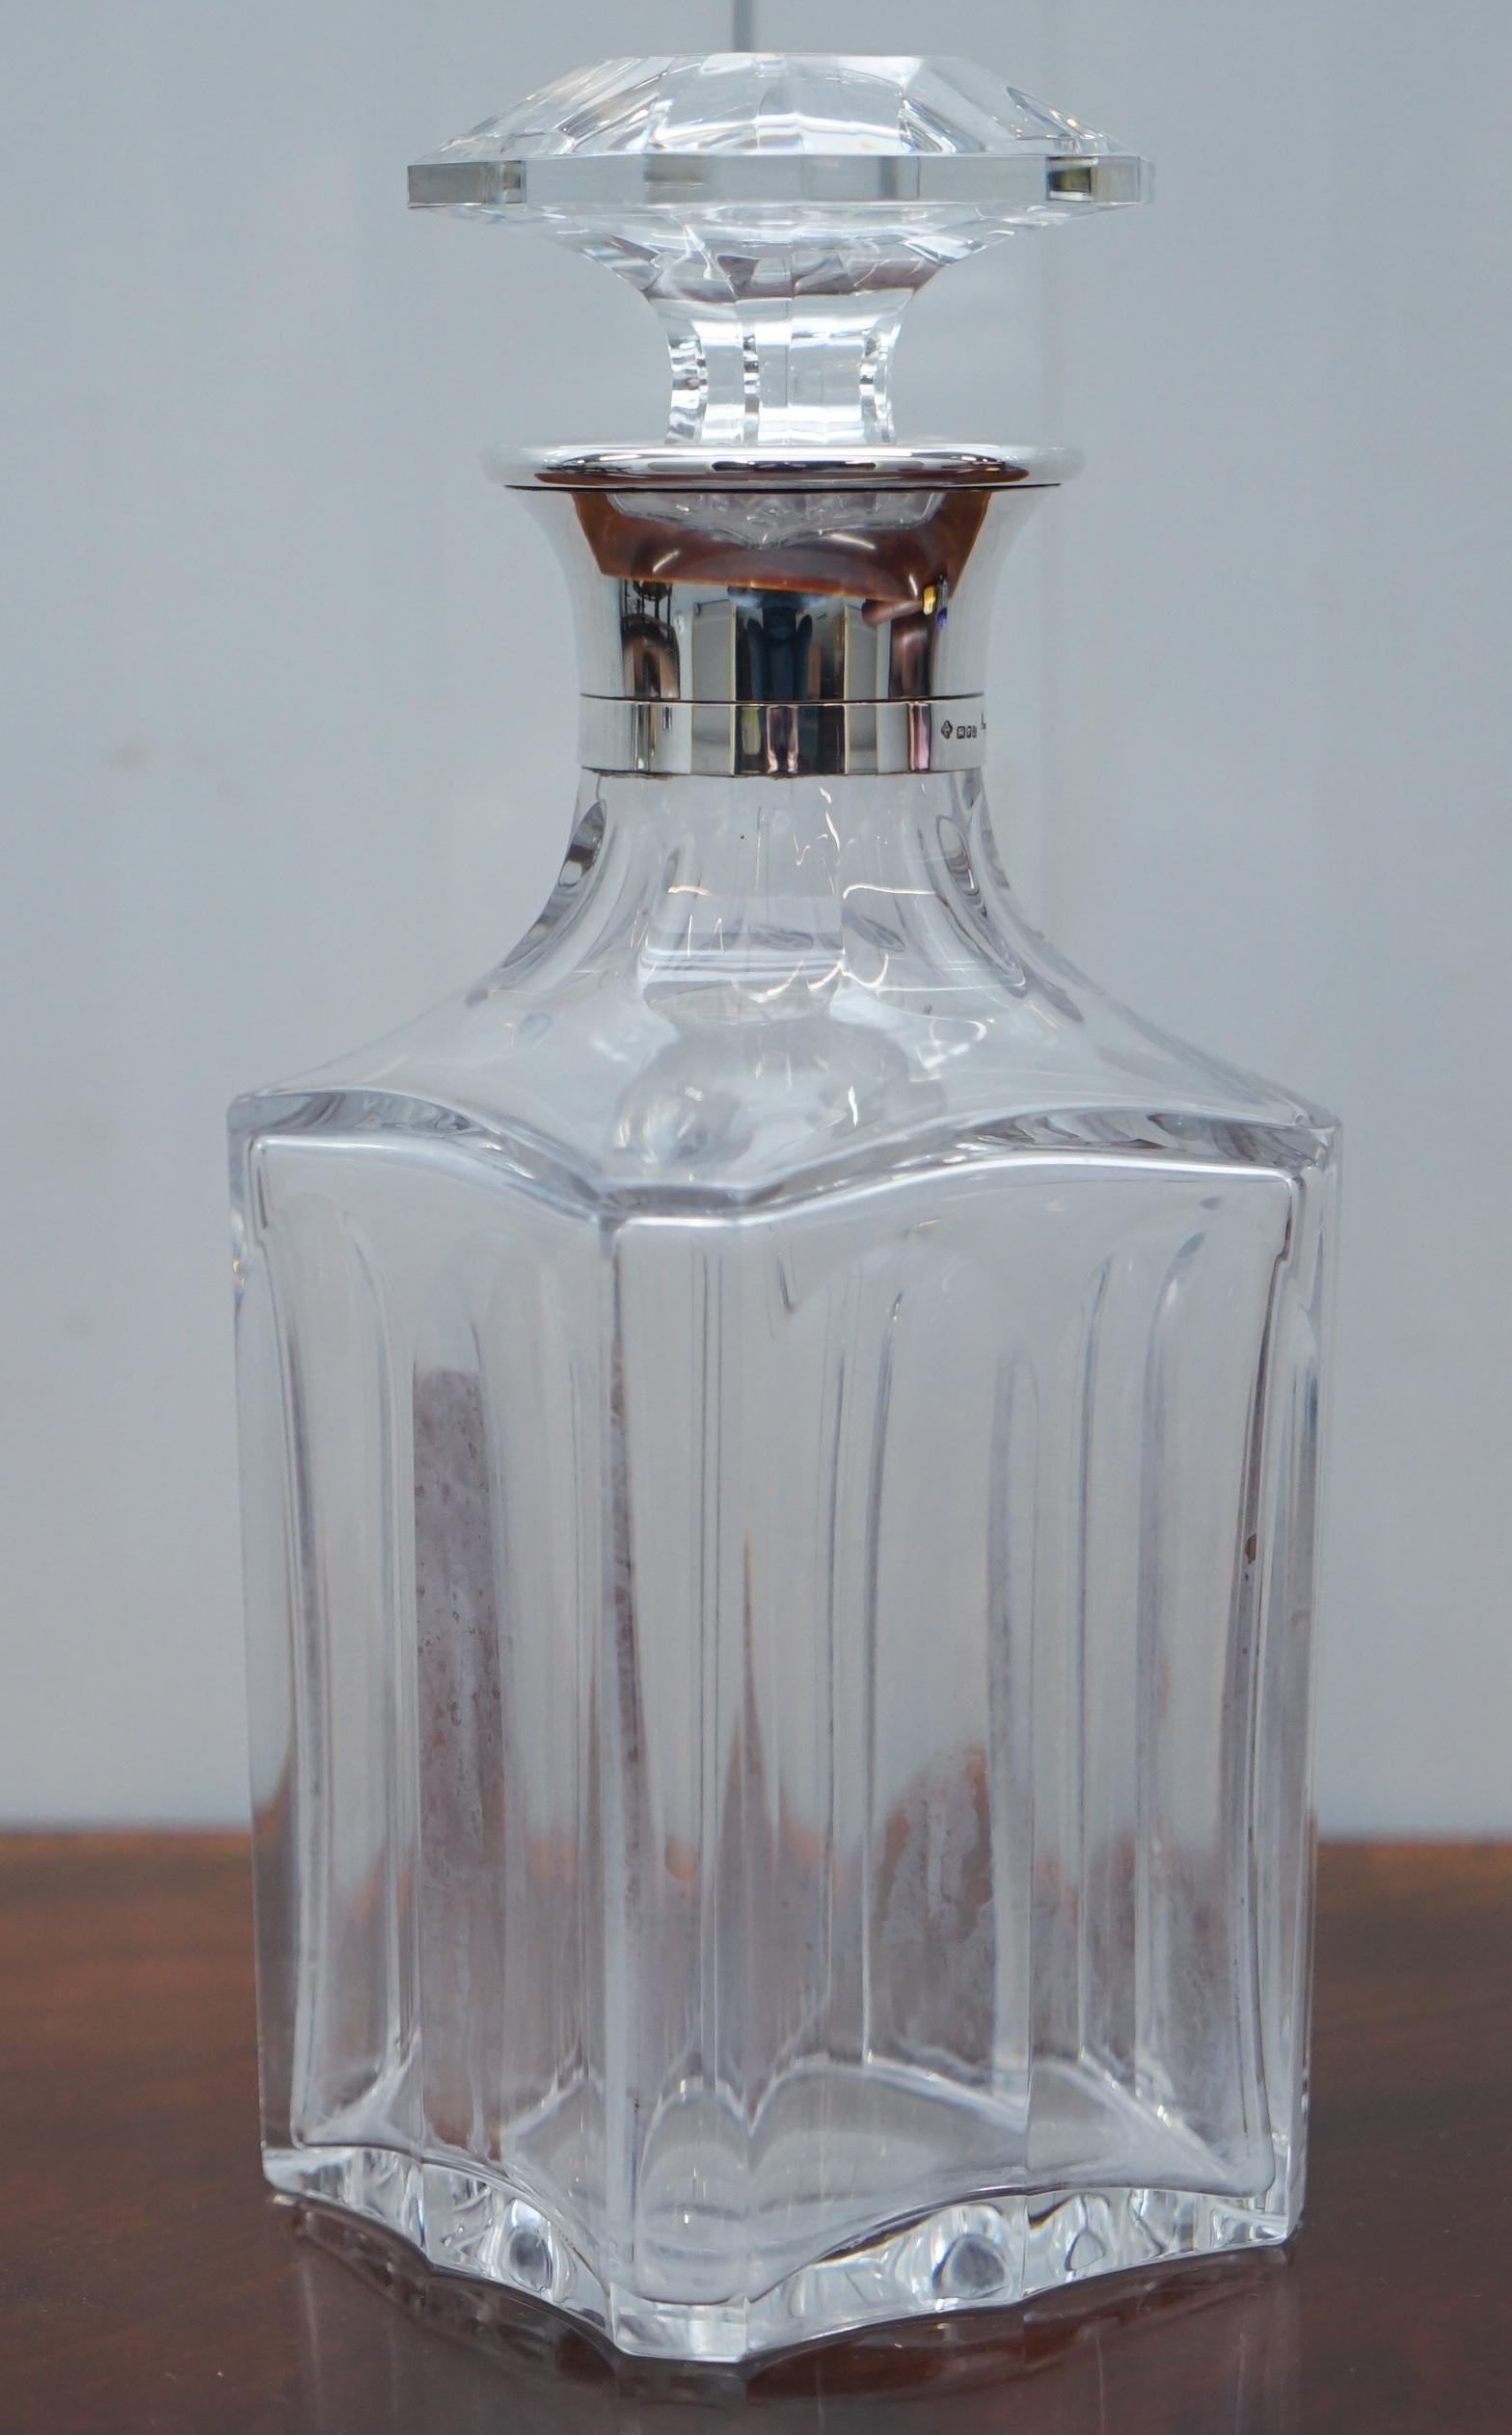 We are delighted to offer for sale this very rare Baccarat Crystal Harcourt Whiskey decanter with the very rare Asprey London sterling silver collar.

A beautiful and very rare piece, the modern versions of these decanters retail for around £5000